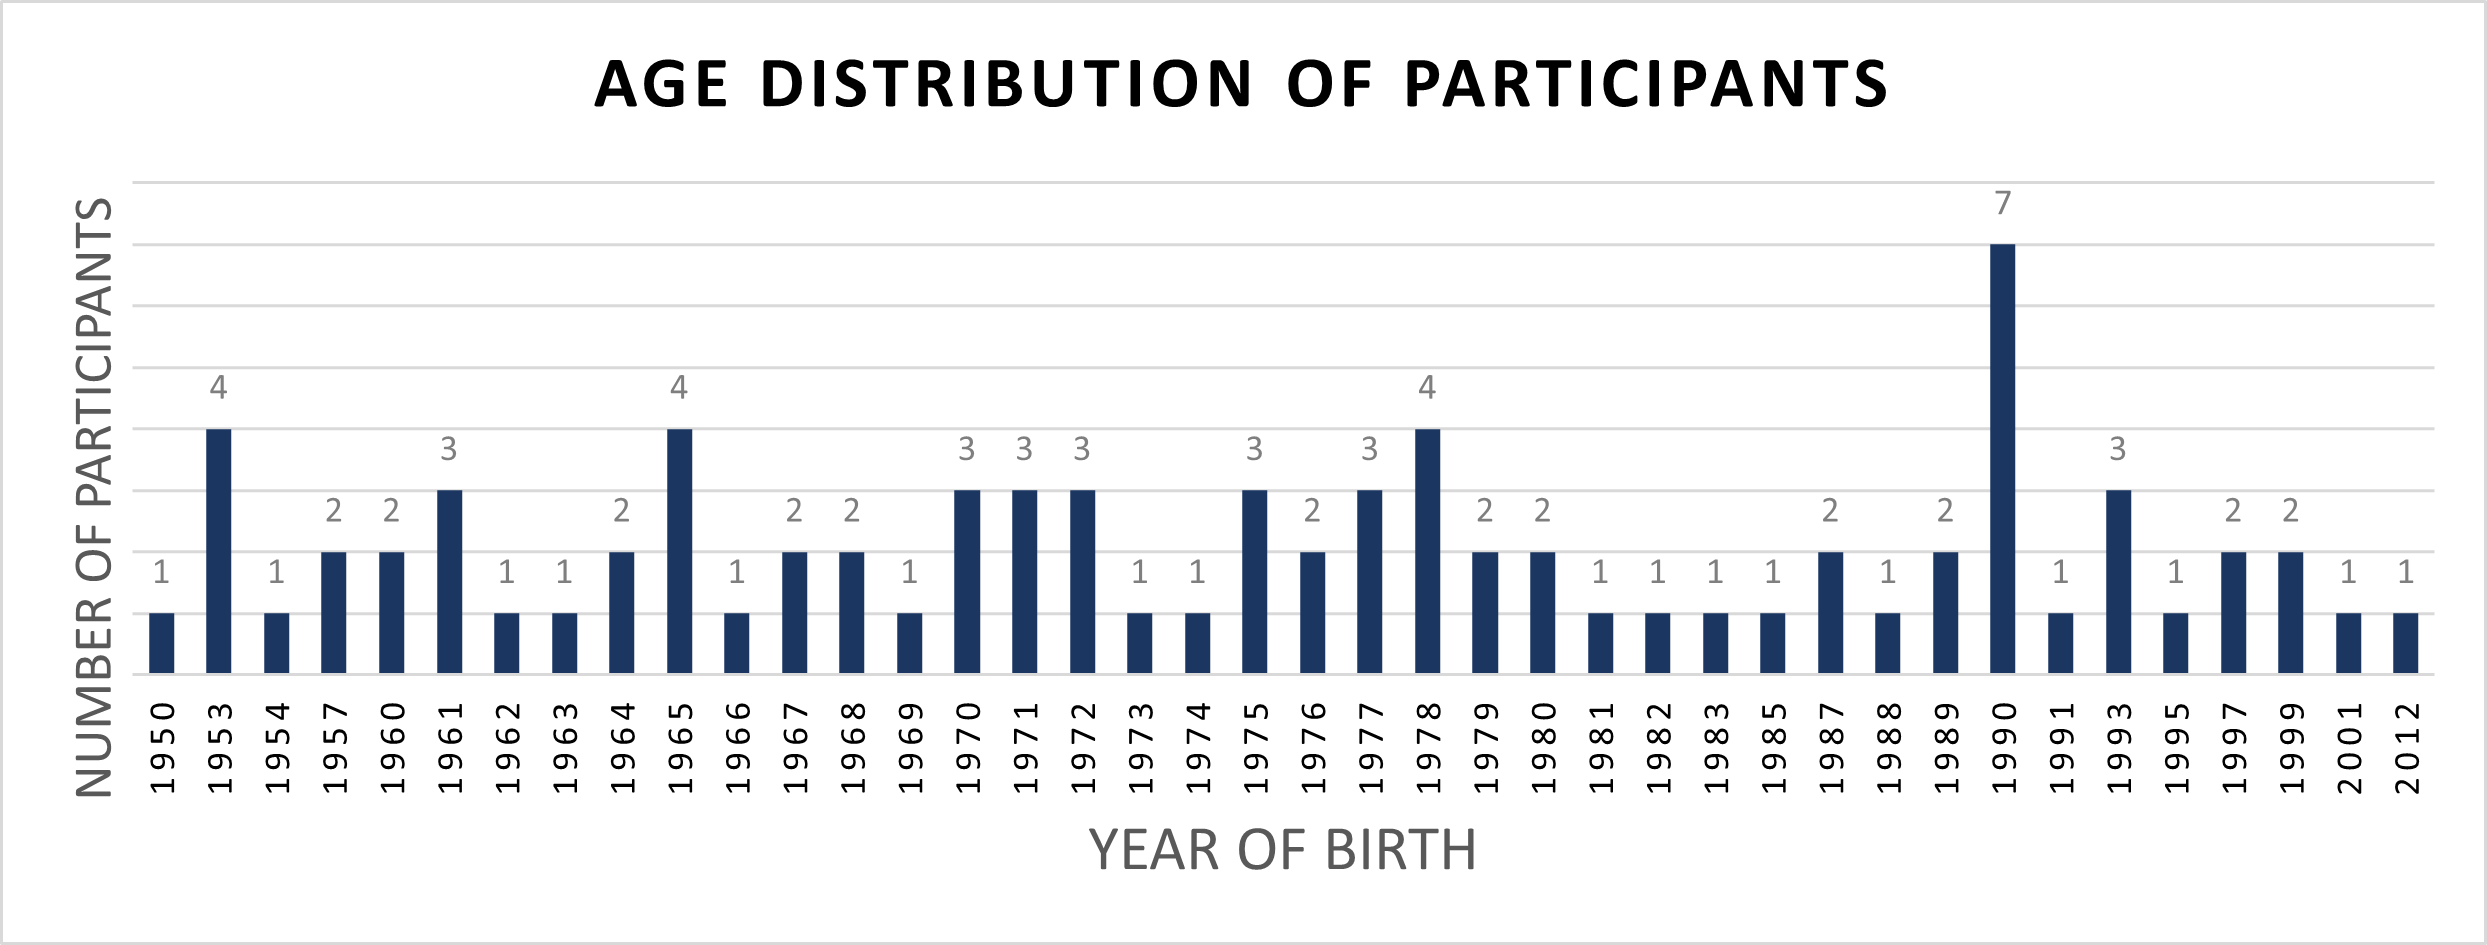 Participants were born between 1950 and 2012, the age distribution is balanced.